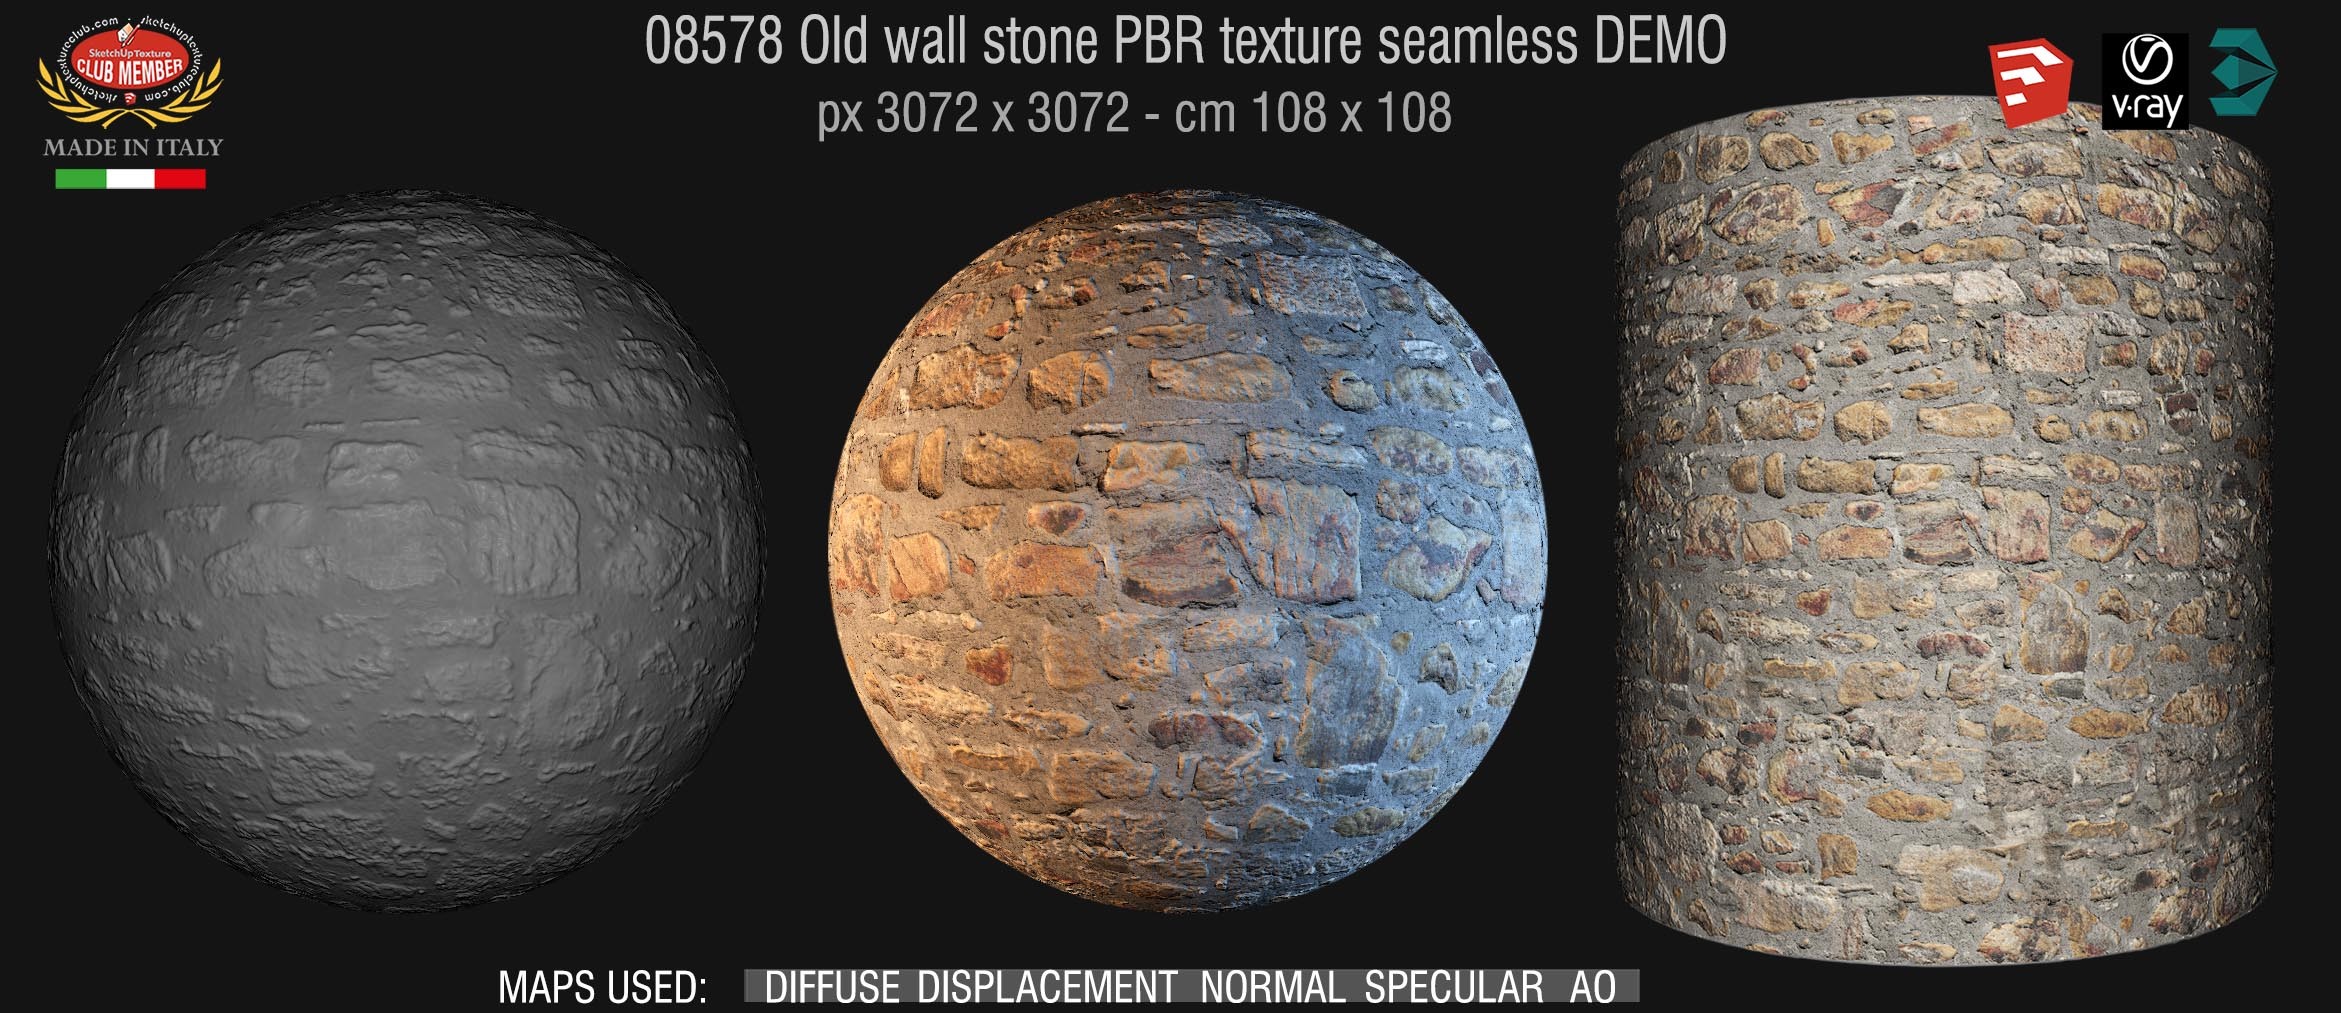 08578 Old Tuscan stone wall PBR texture seamless DEMO